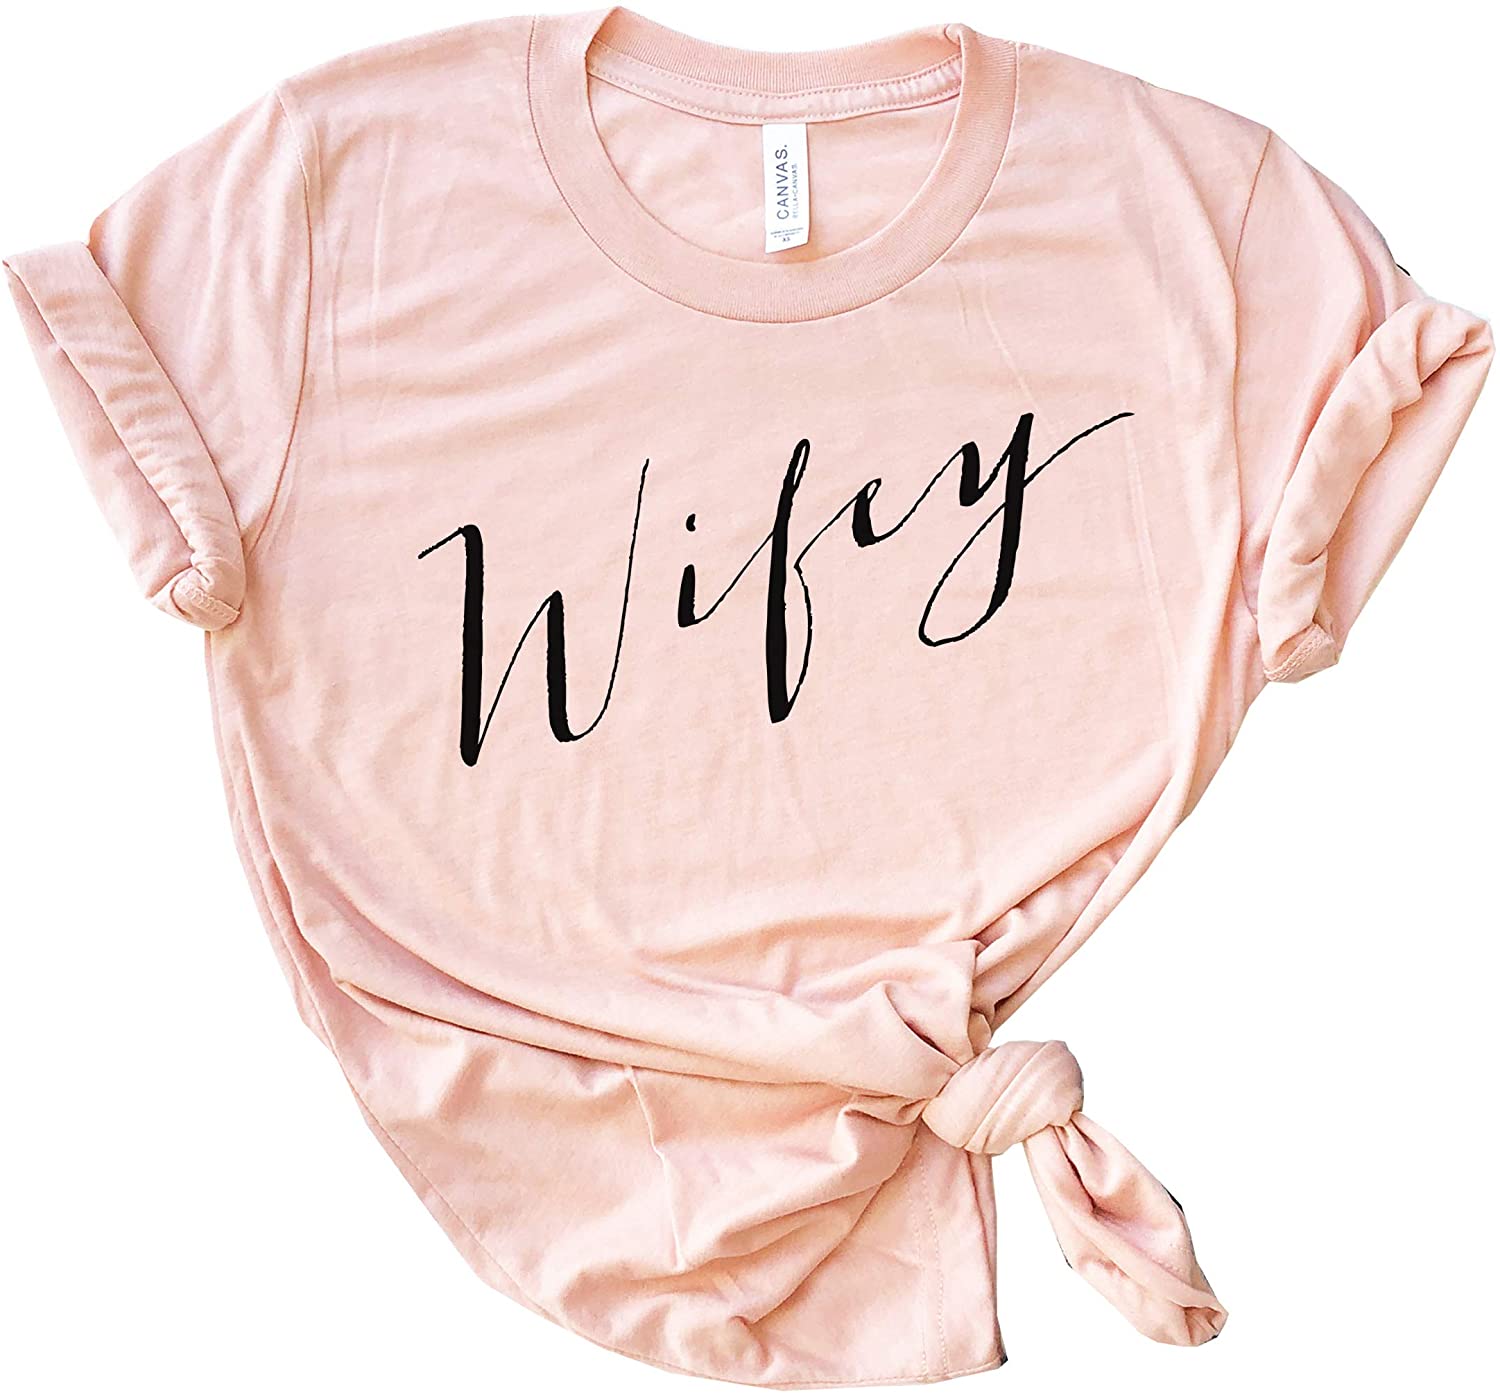 Download T Shirts For Women Shirt Tee Wifey Hubby Just Heather Prism Peach Size Large S Ebay